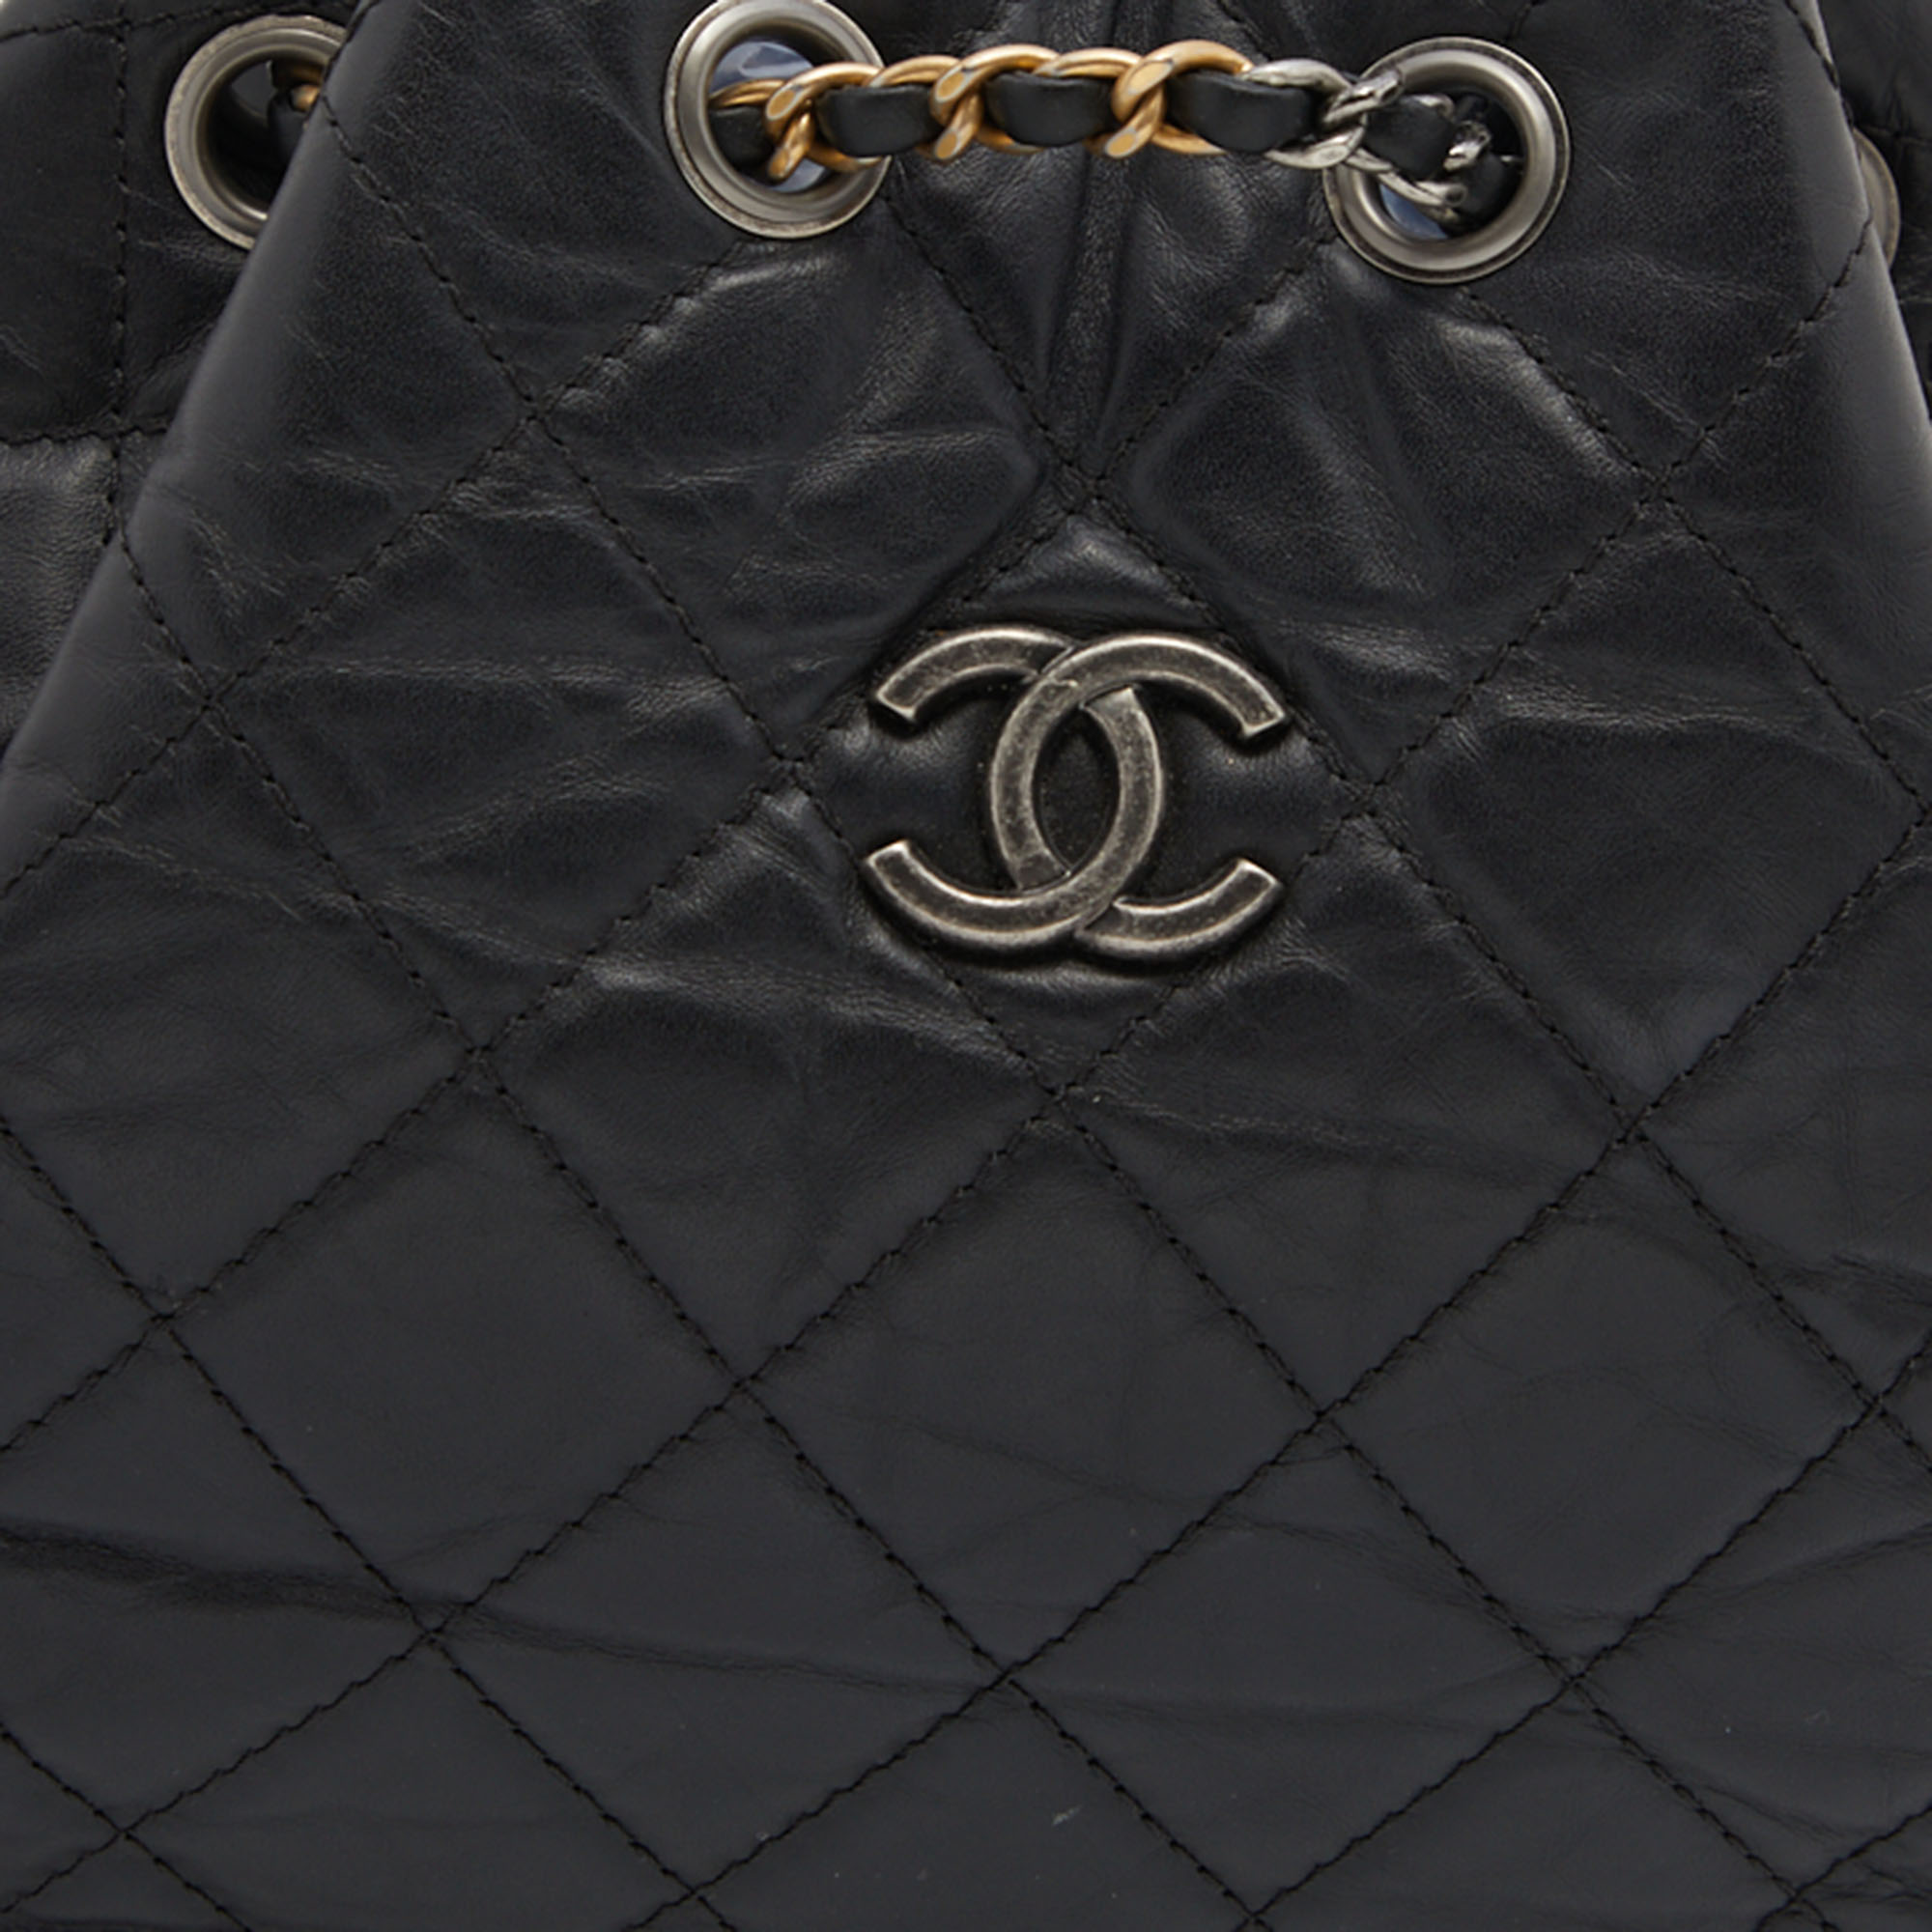 Gabrielle leather backpack Chanel Black in Leather - 22820546